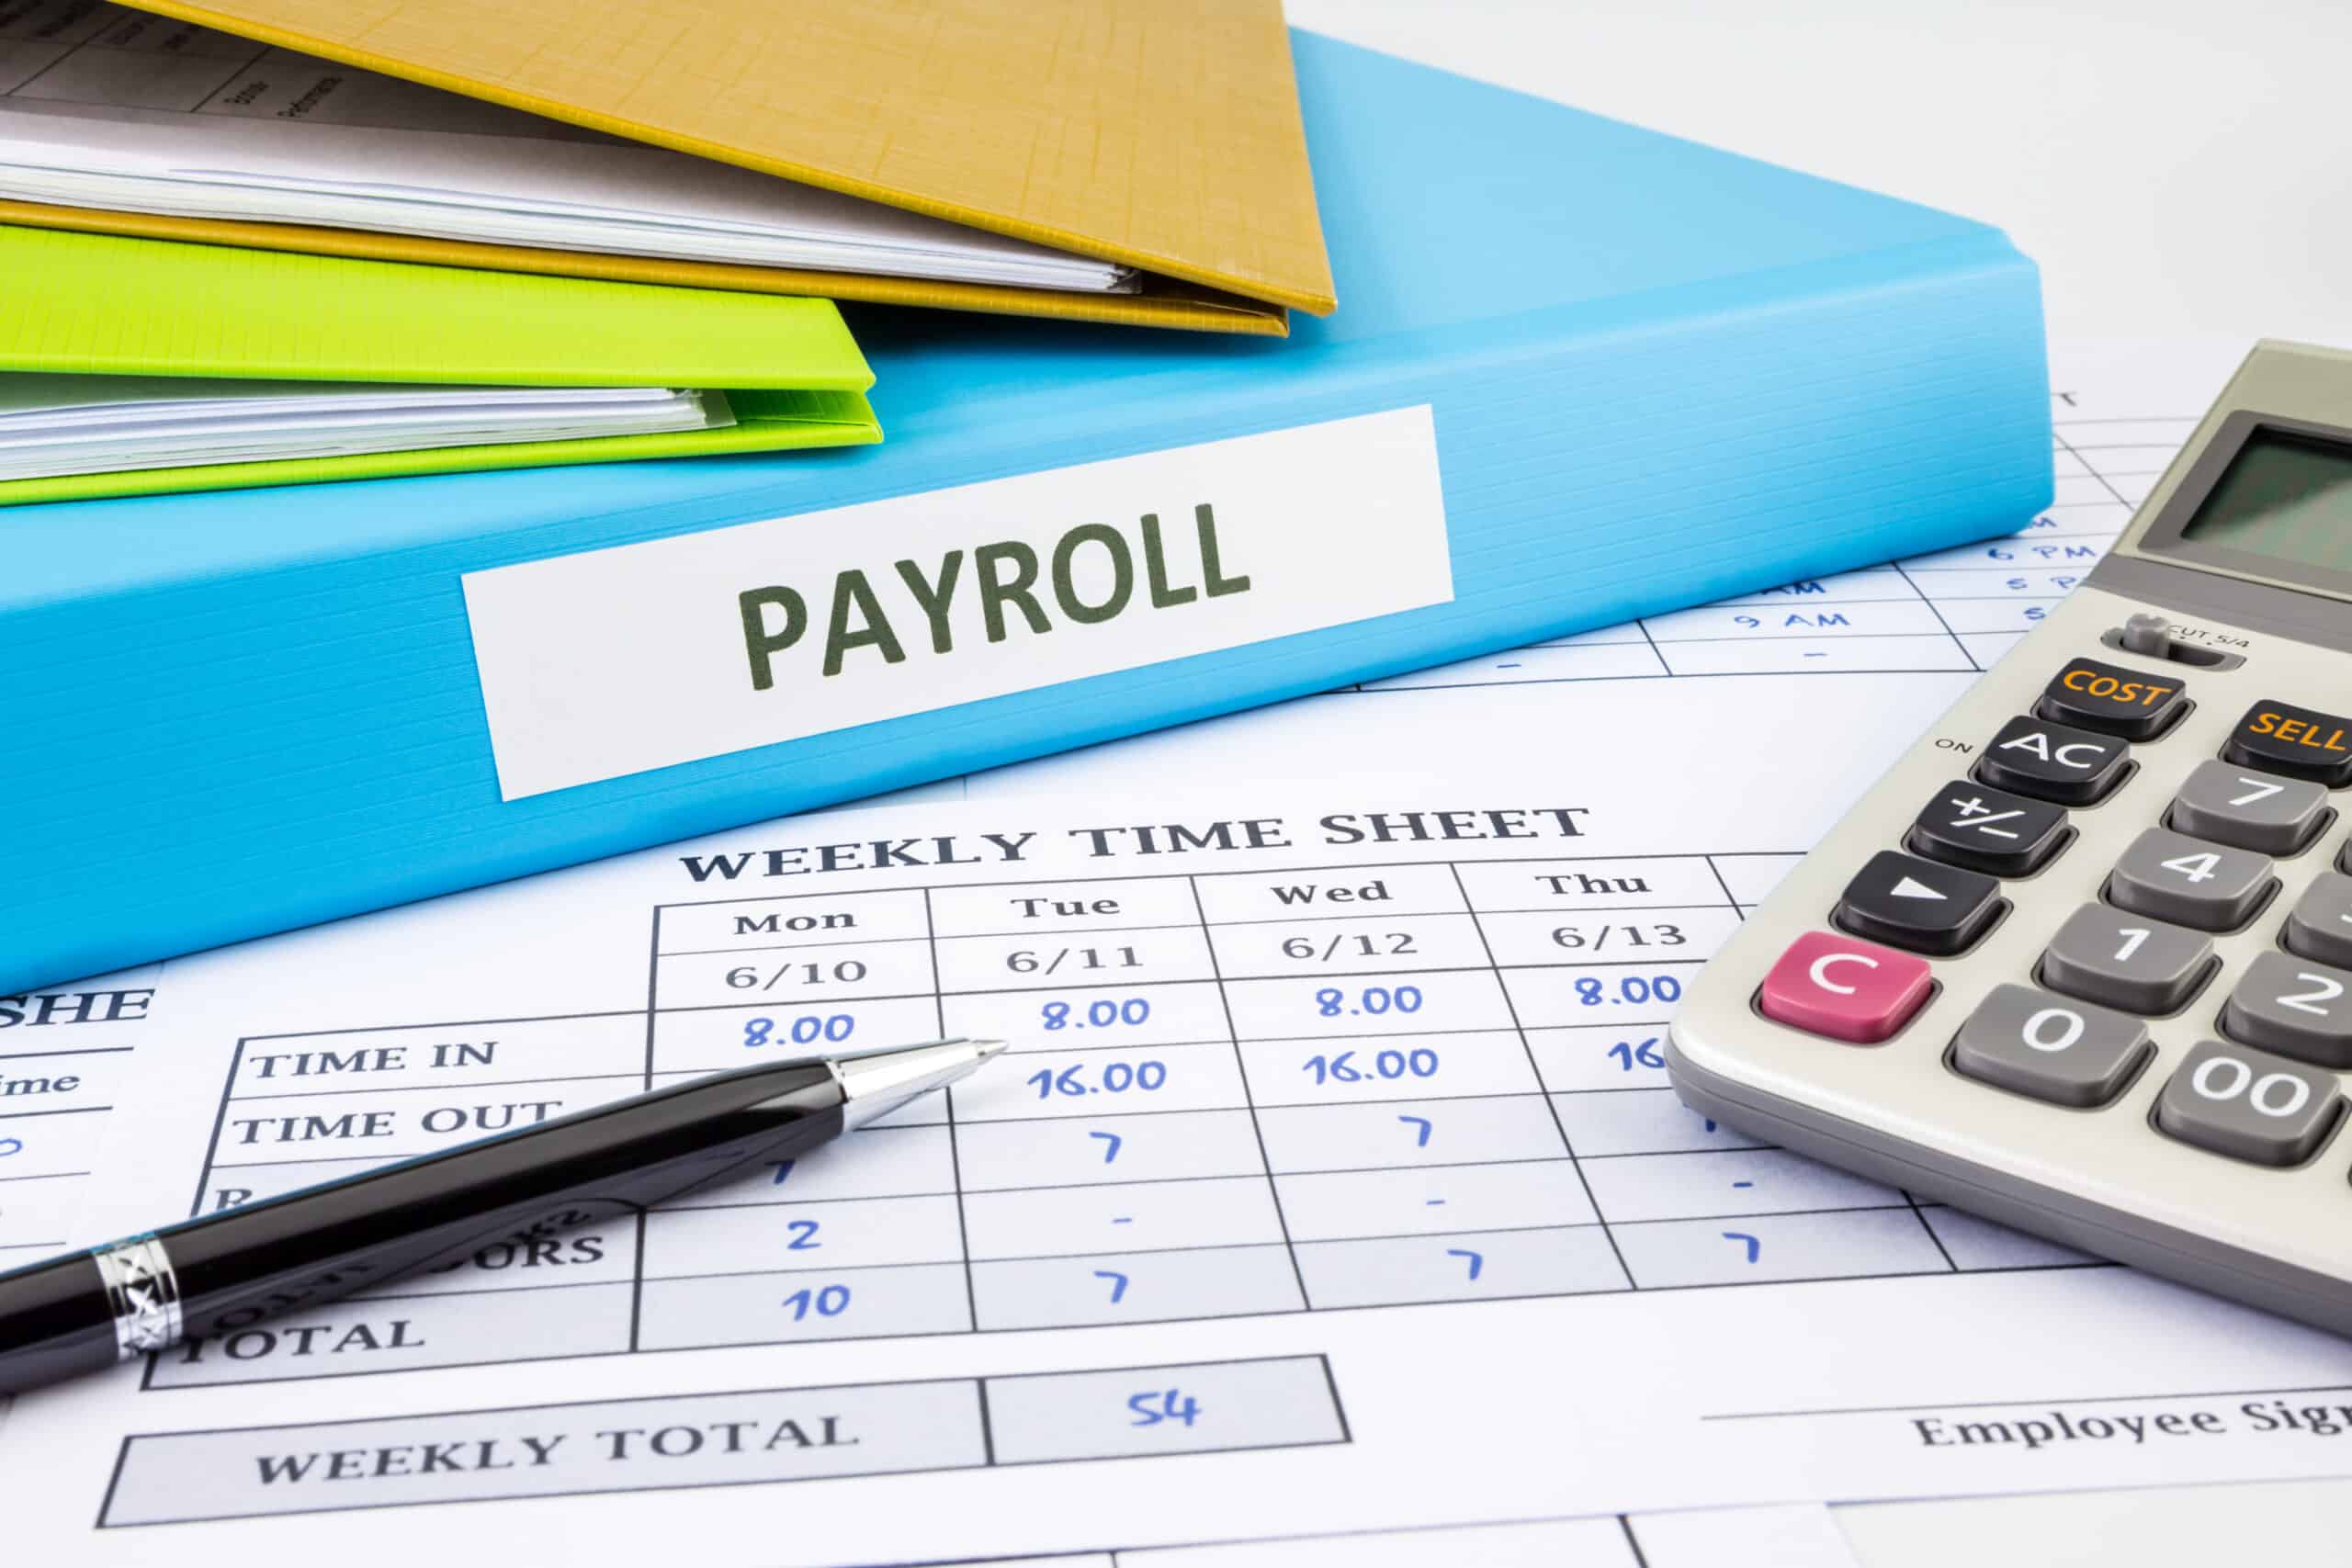 Payroll assistance for small business and medium businesses